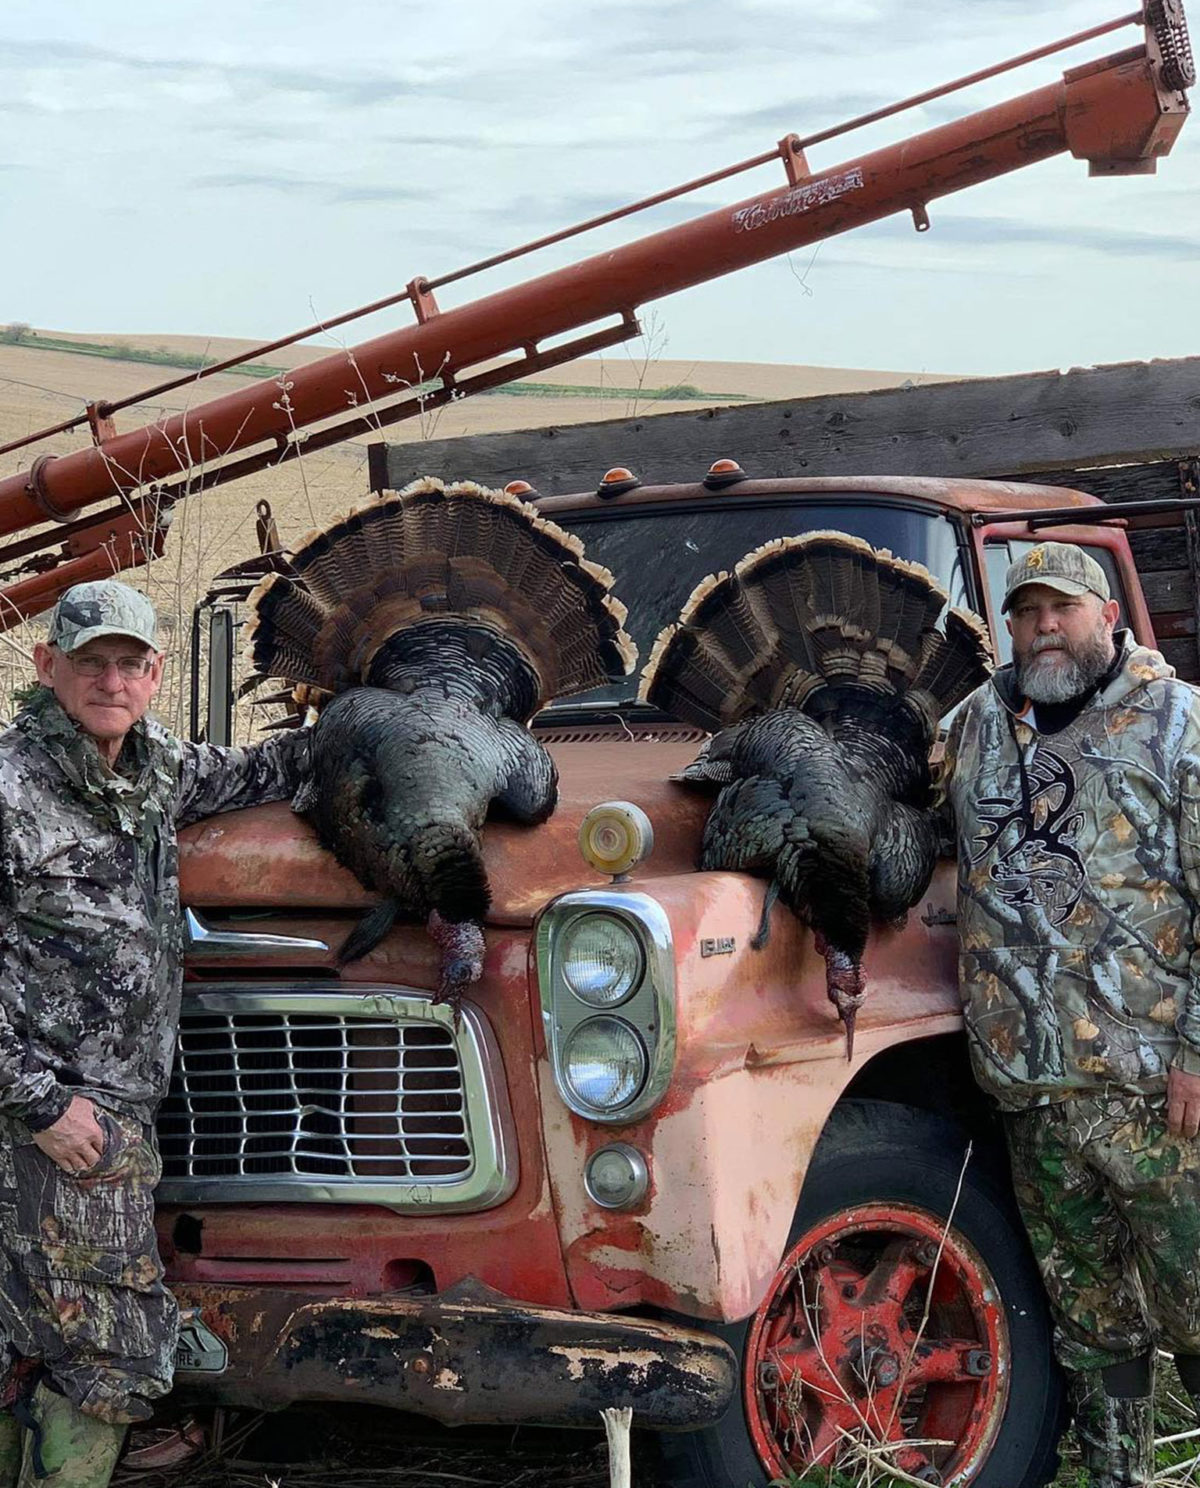 Nebraska Turkey Hunting Guides & Outfitters